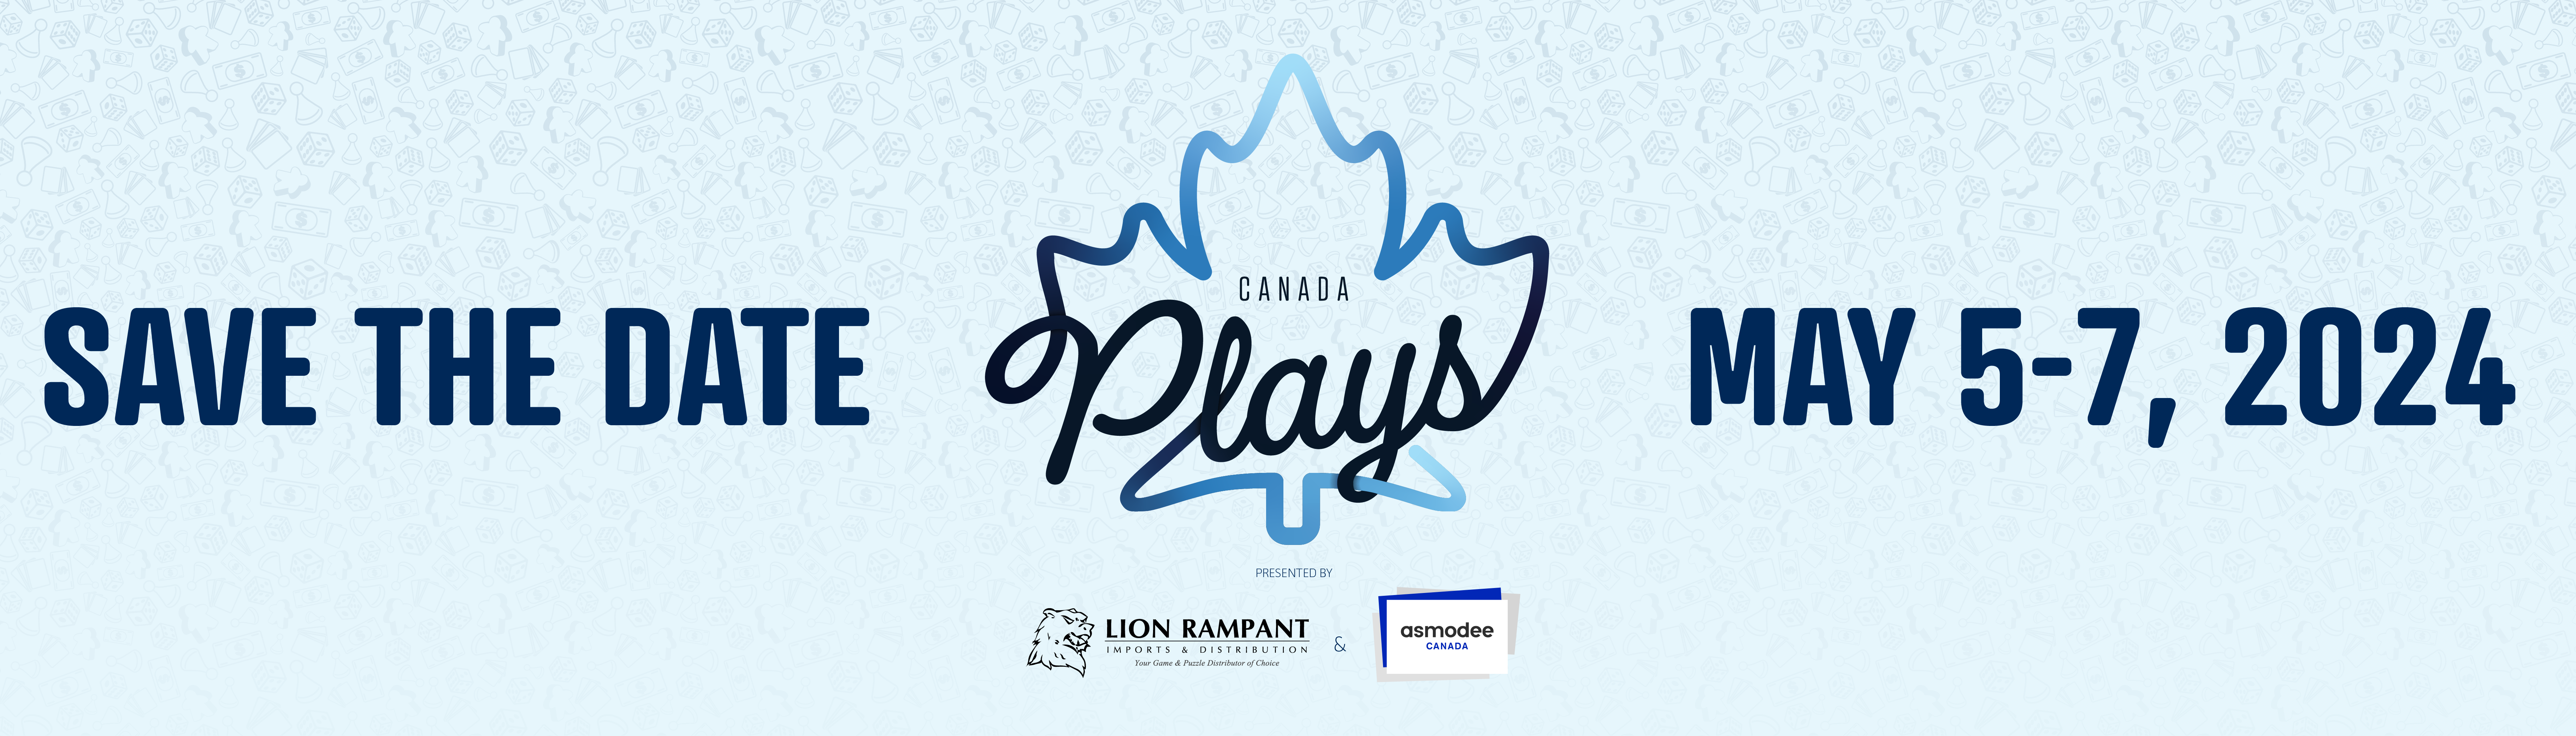 THE ANNUAL CANADA PLAYS SPRING OPEN HOUSE EXPERIENCE IS BACK!